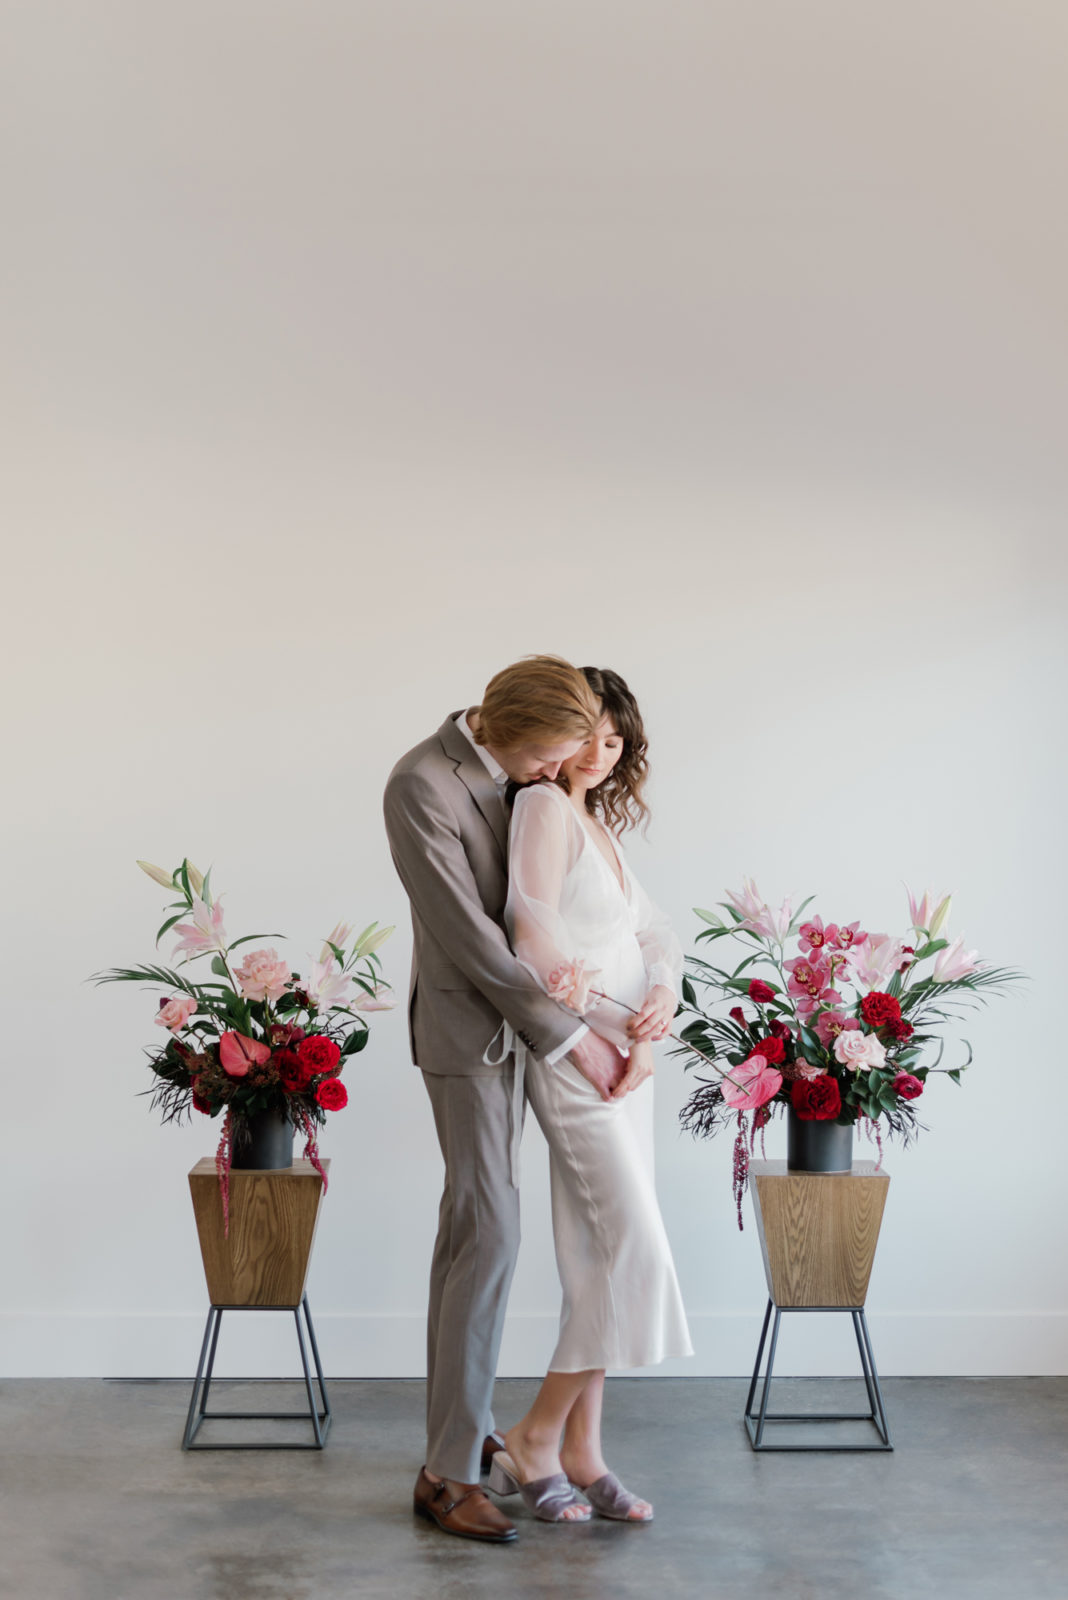 Modern wedding inspiration with a short bridal dress, a grey suit, and vibrant pink and berry hued florals